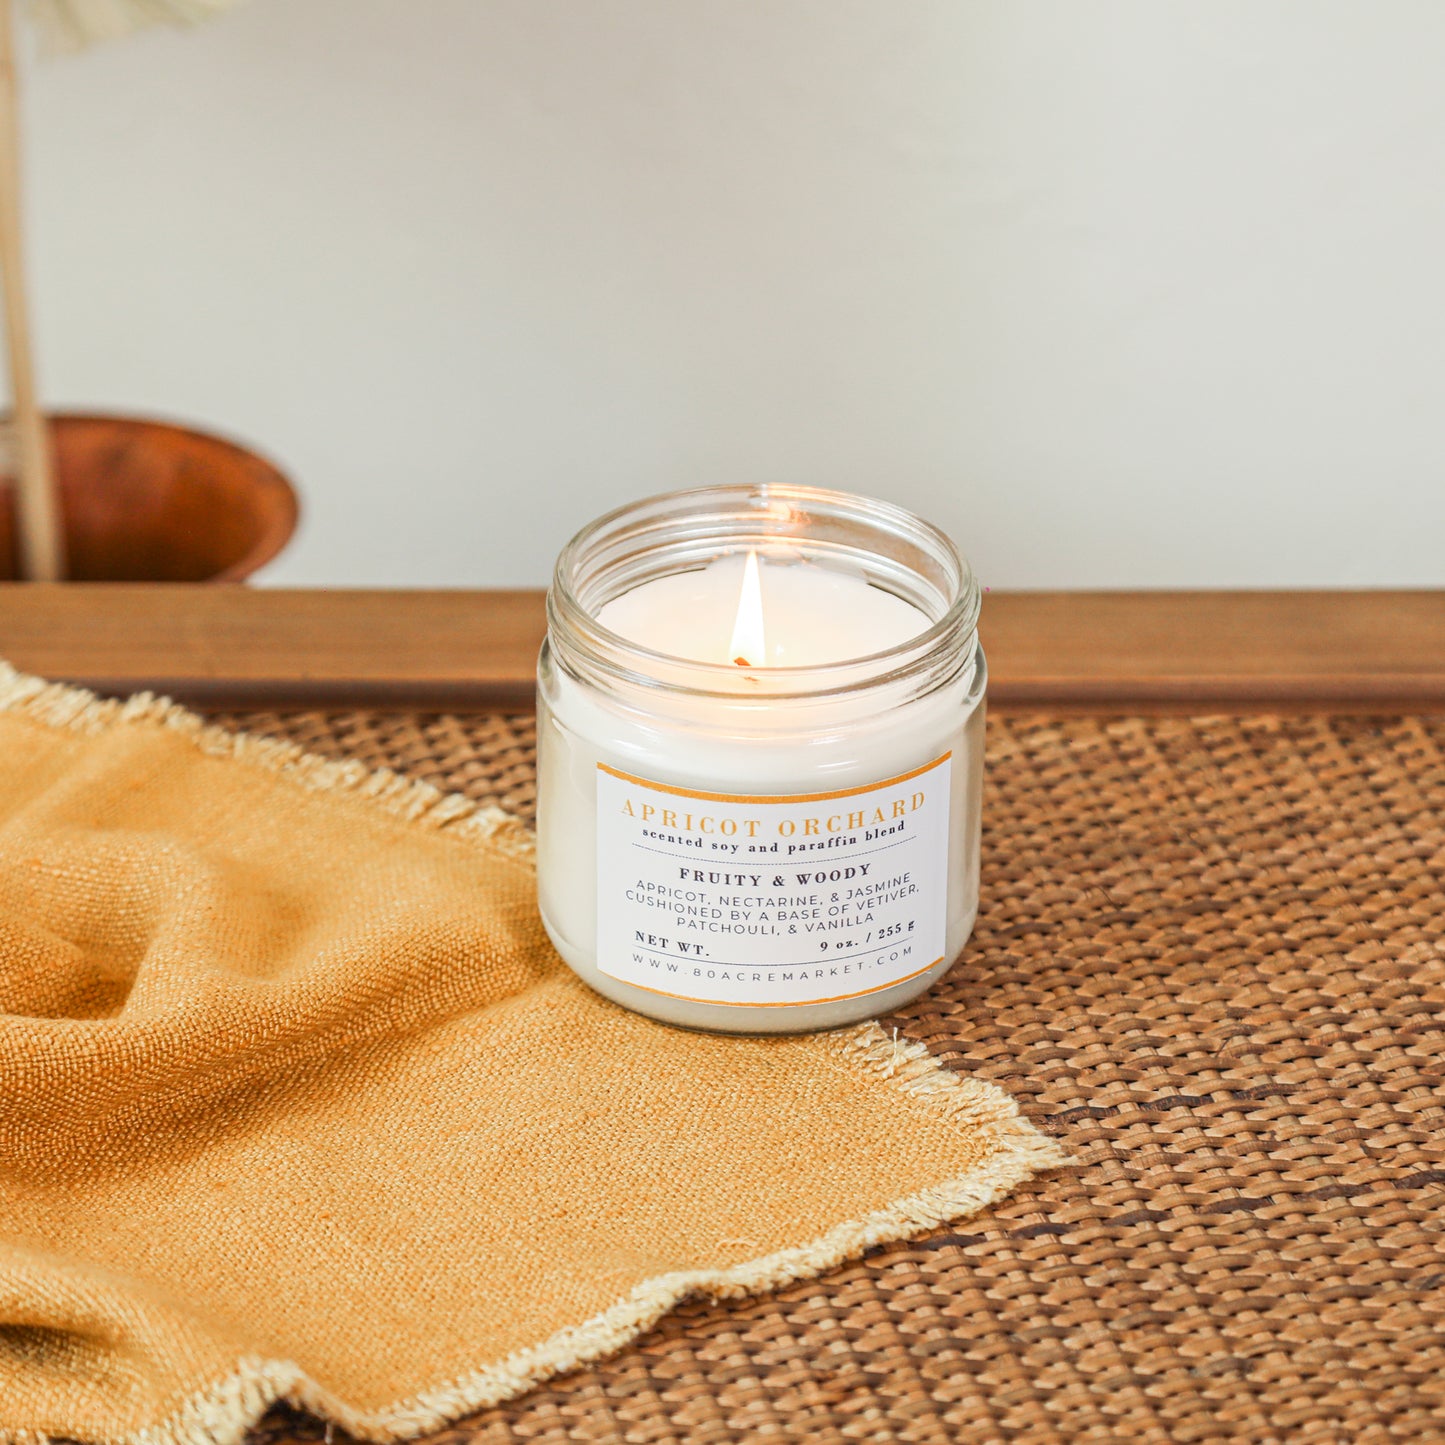 Apricot Orchard Candle